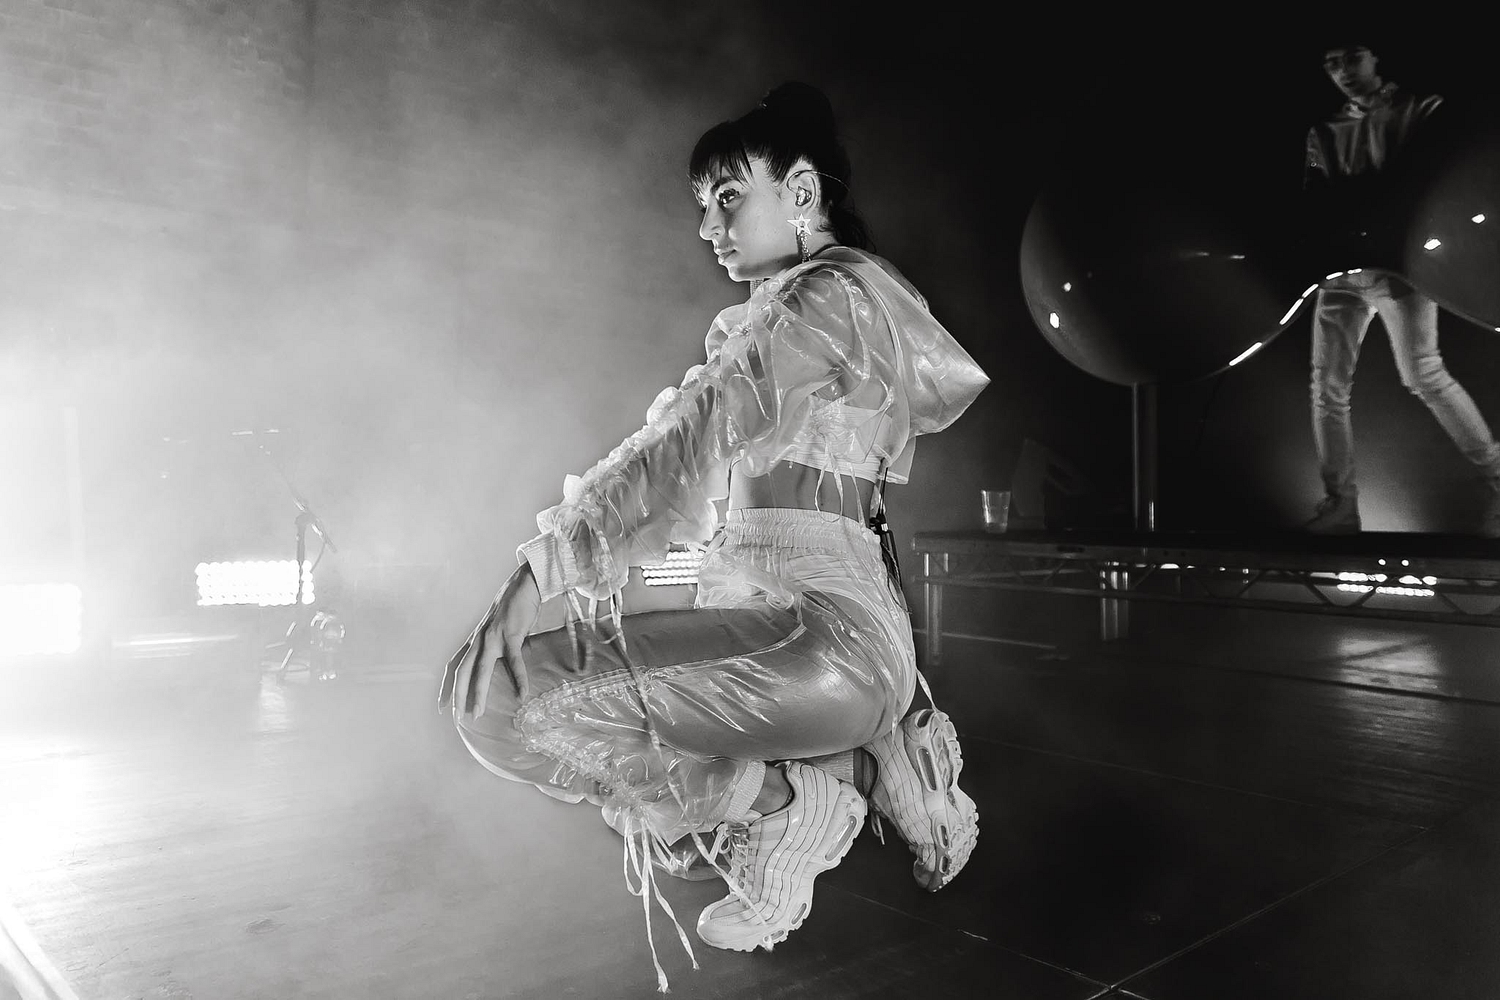 Charli XCX shares 'Focus' and 'No Angel'